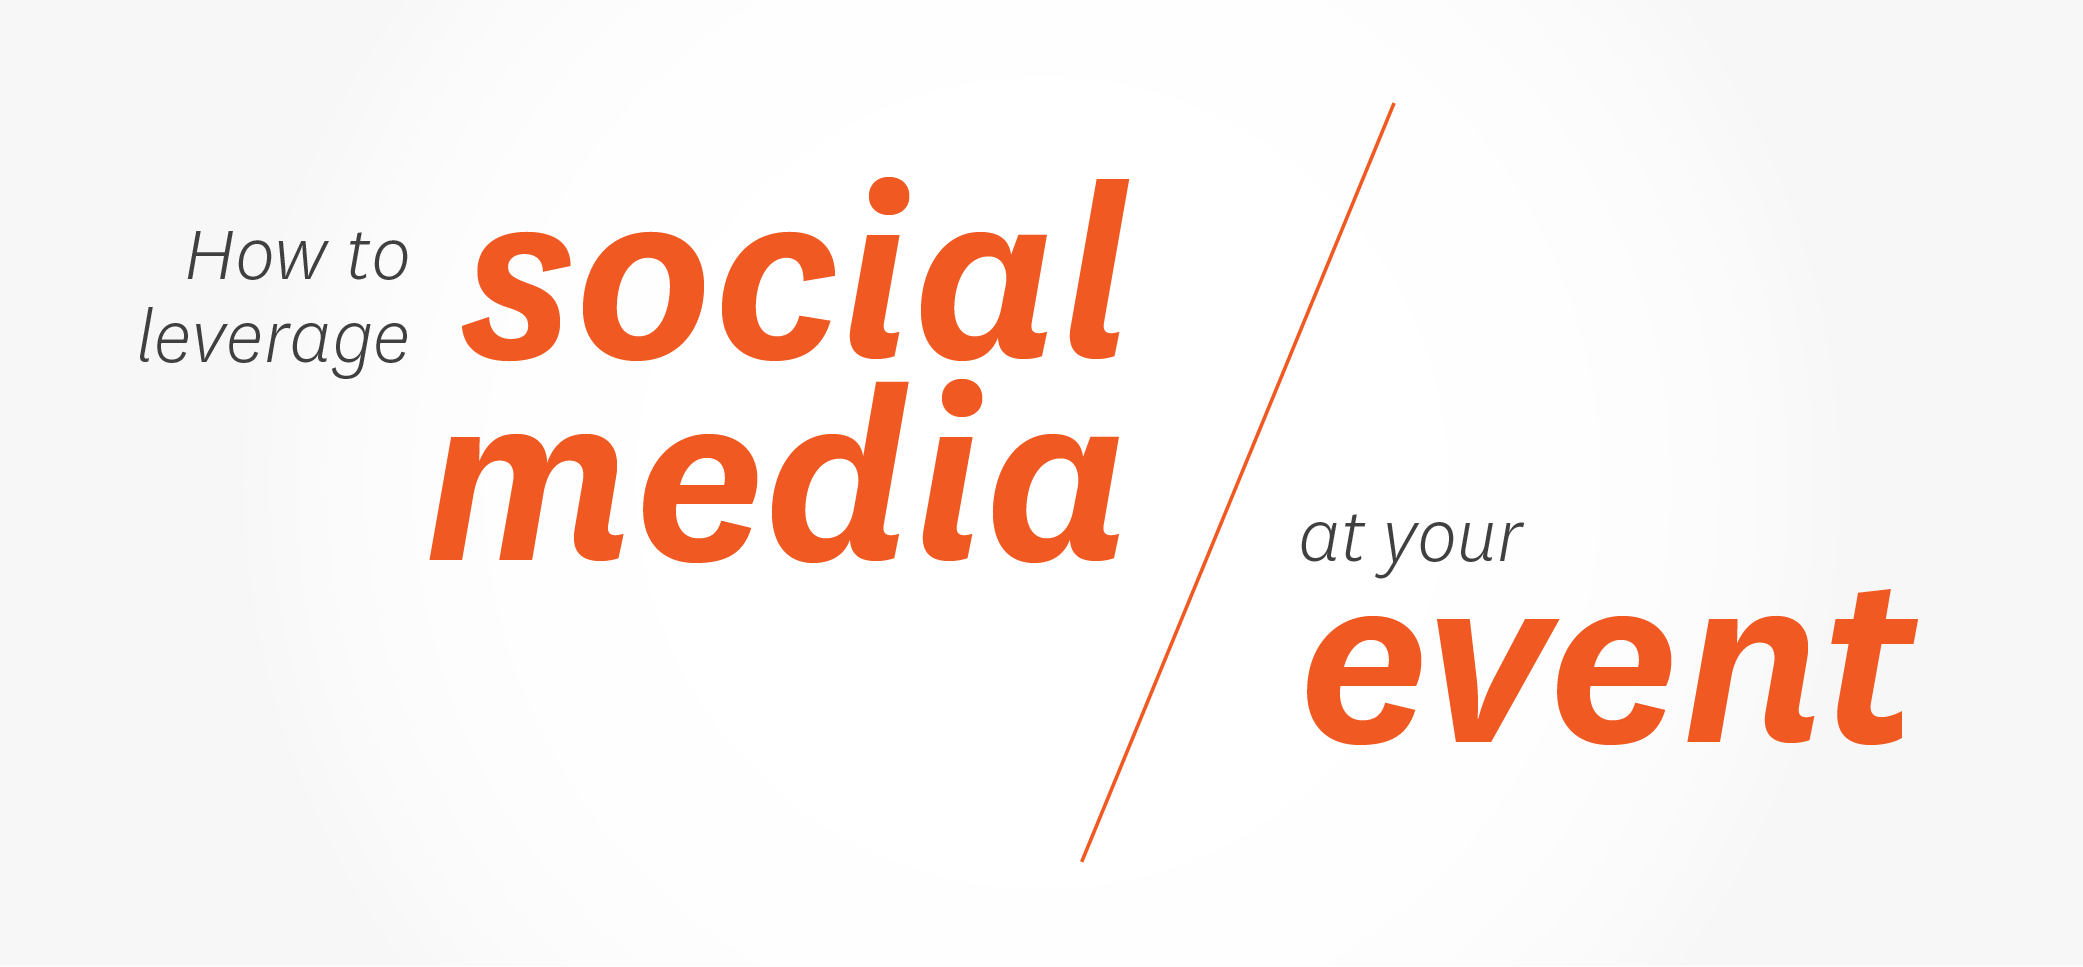 How to leverage social media event marketing at my conference